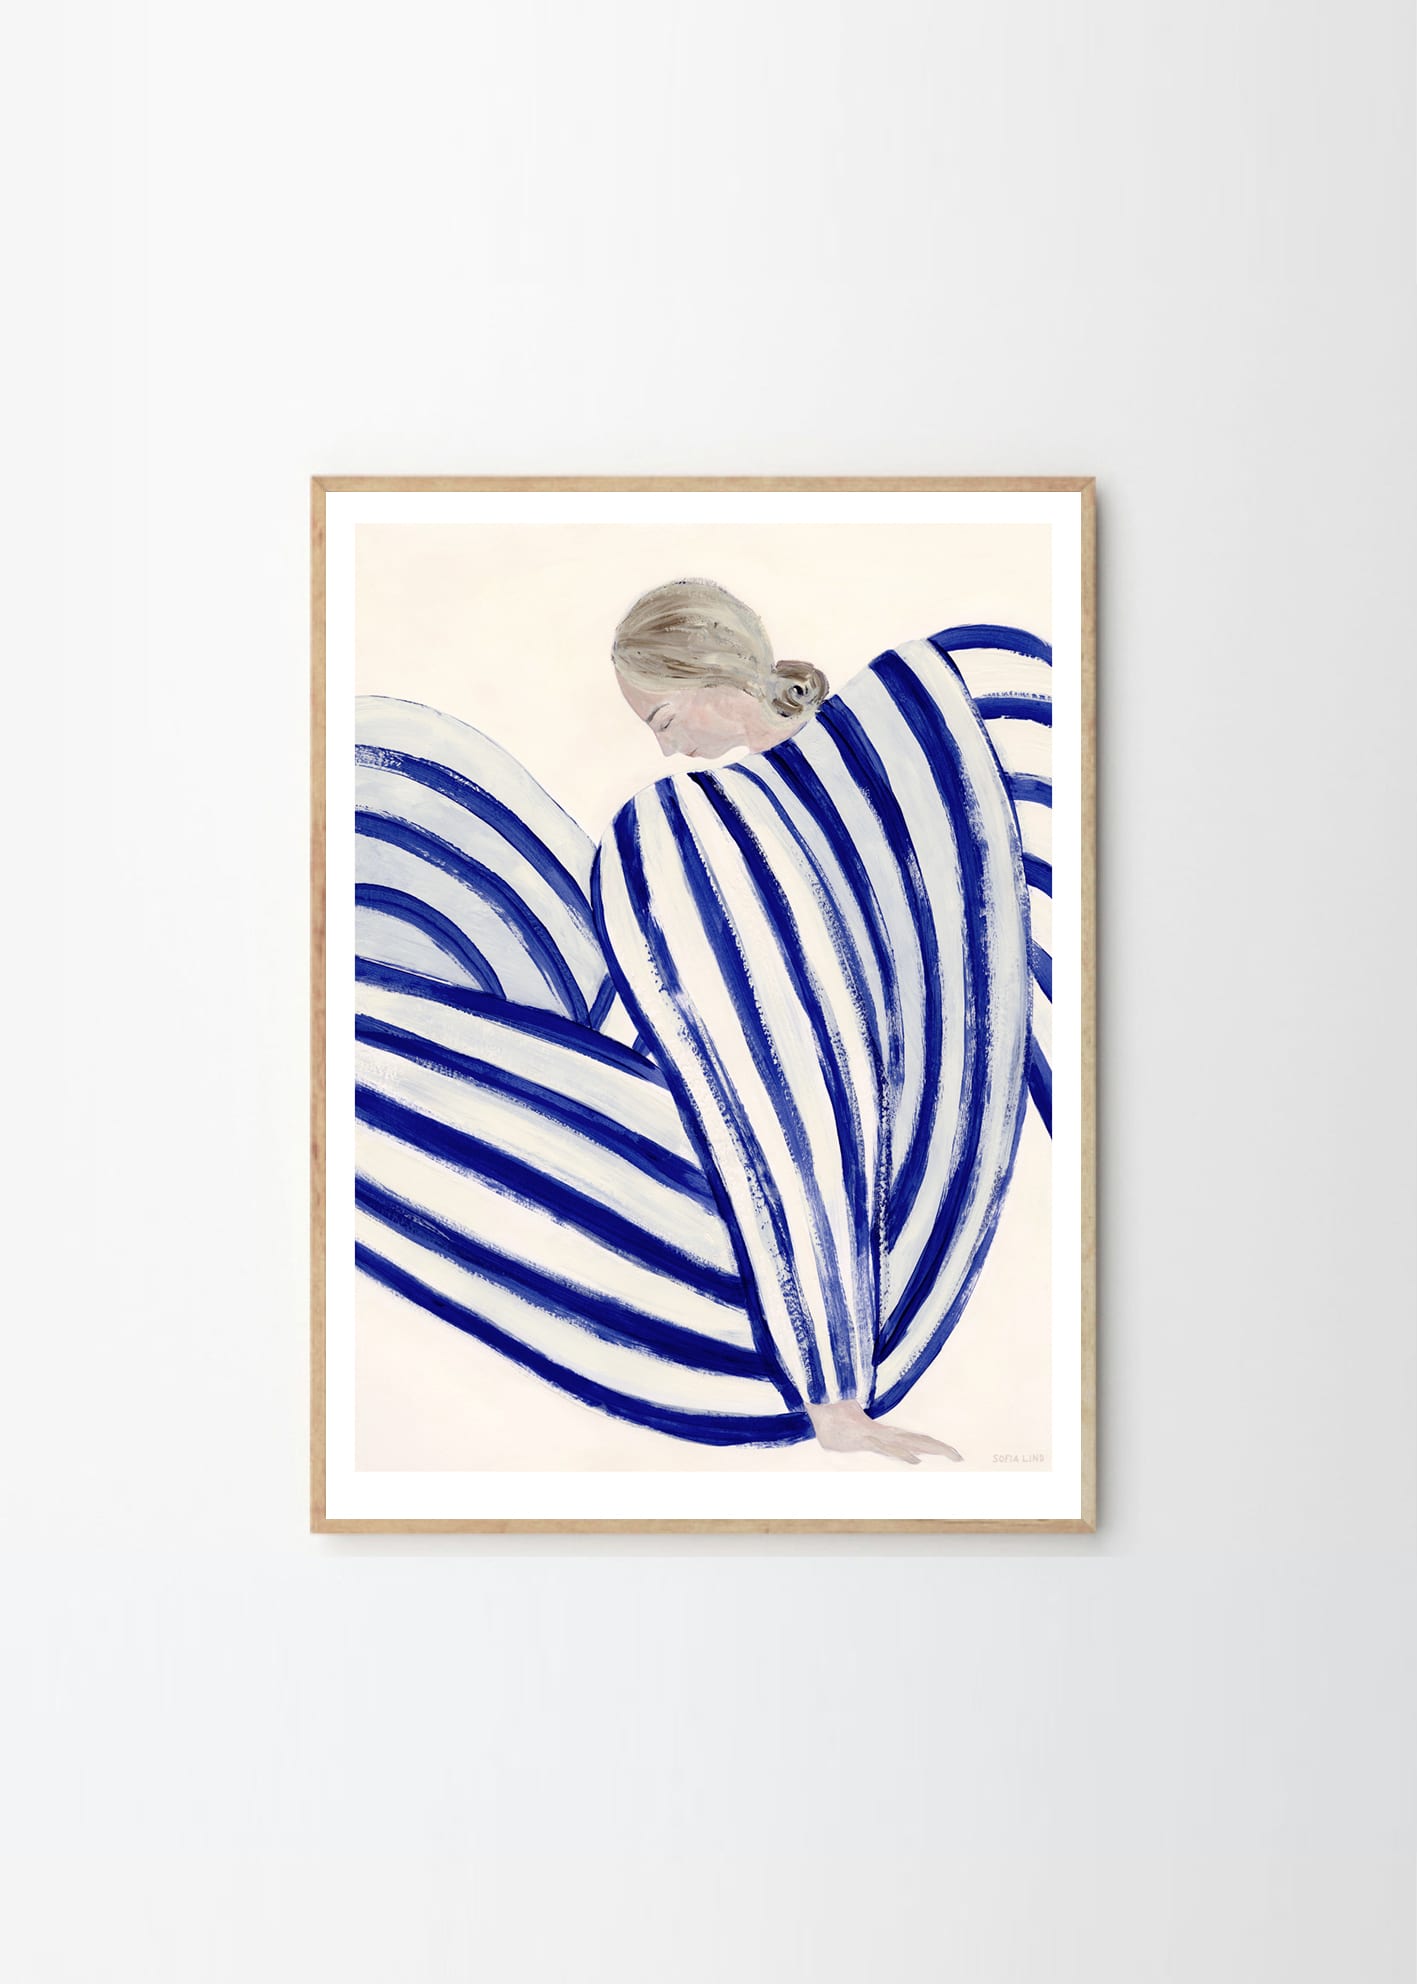 Sofia Lind, Blue Stripe At Concorde art print for THE POSTER CLUB